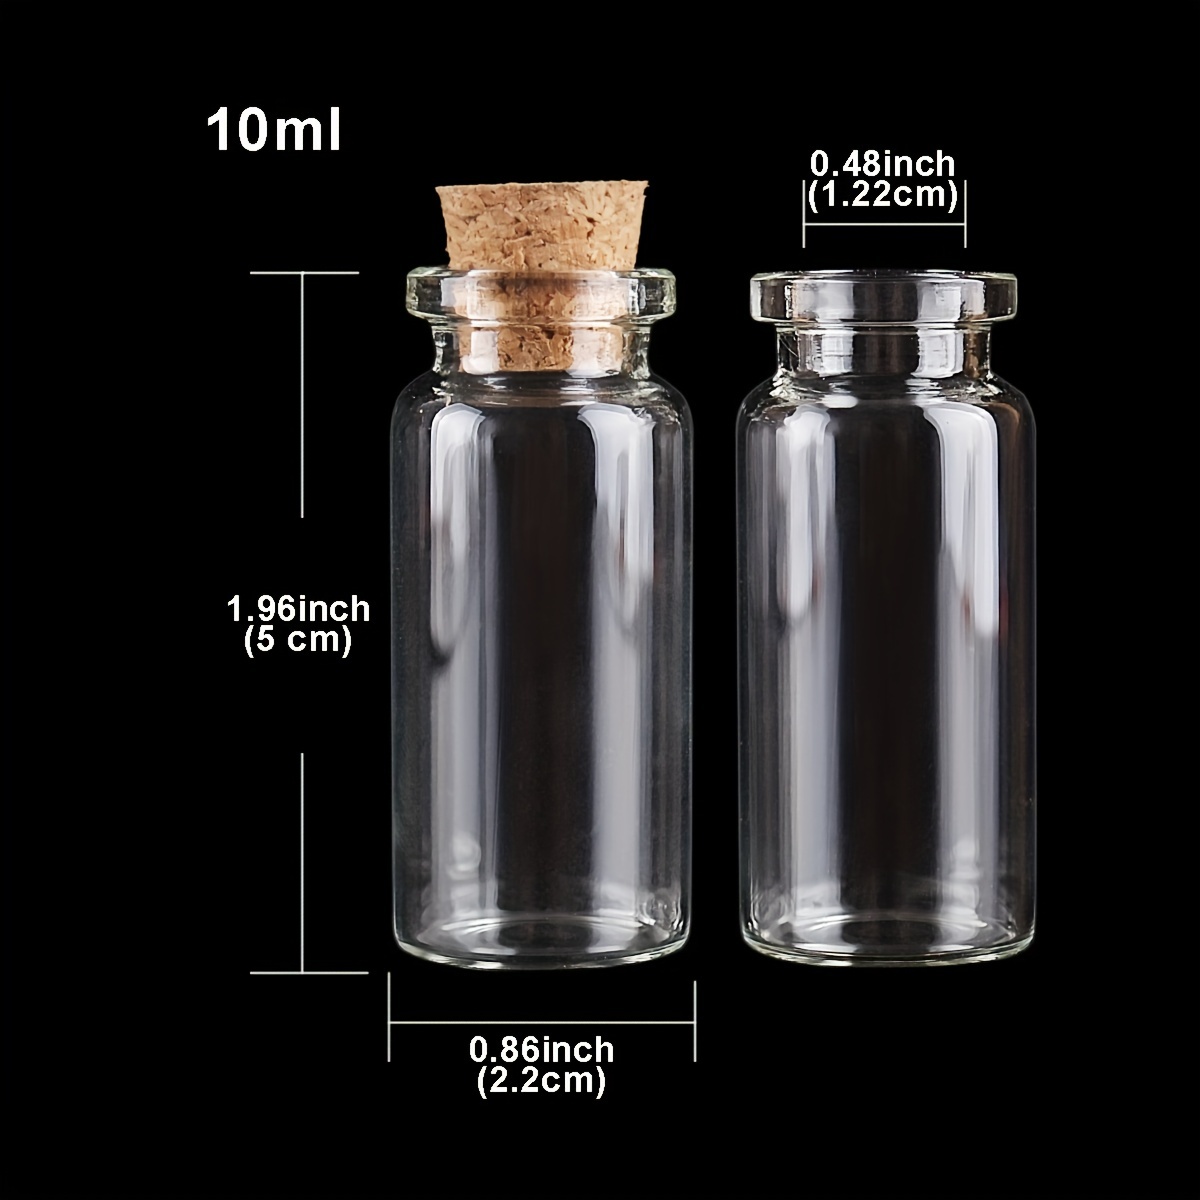 50 Pieces Mini Glass Jars Bottles with Cork Stoppers 5 Shapes Bottle